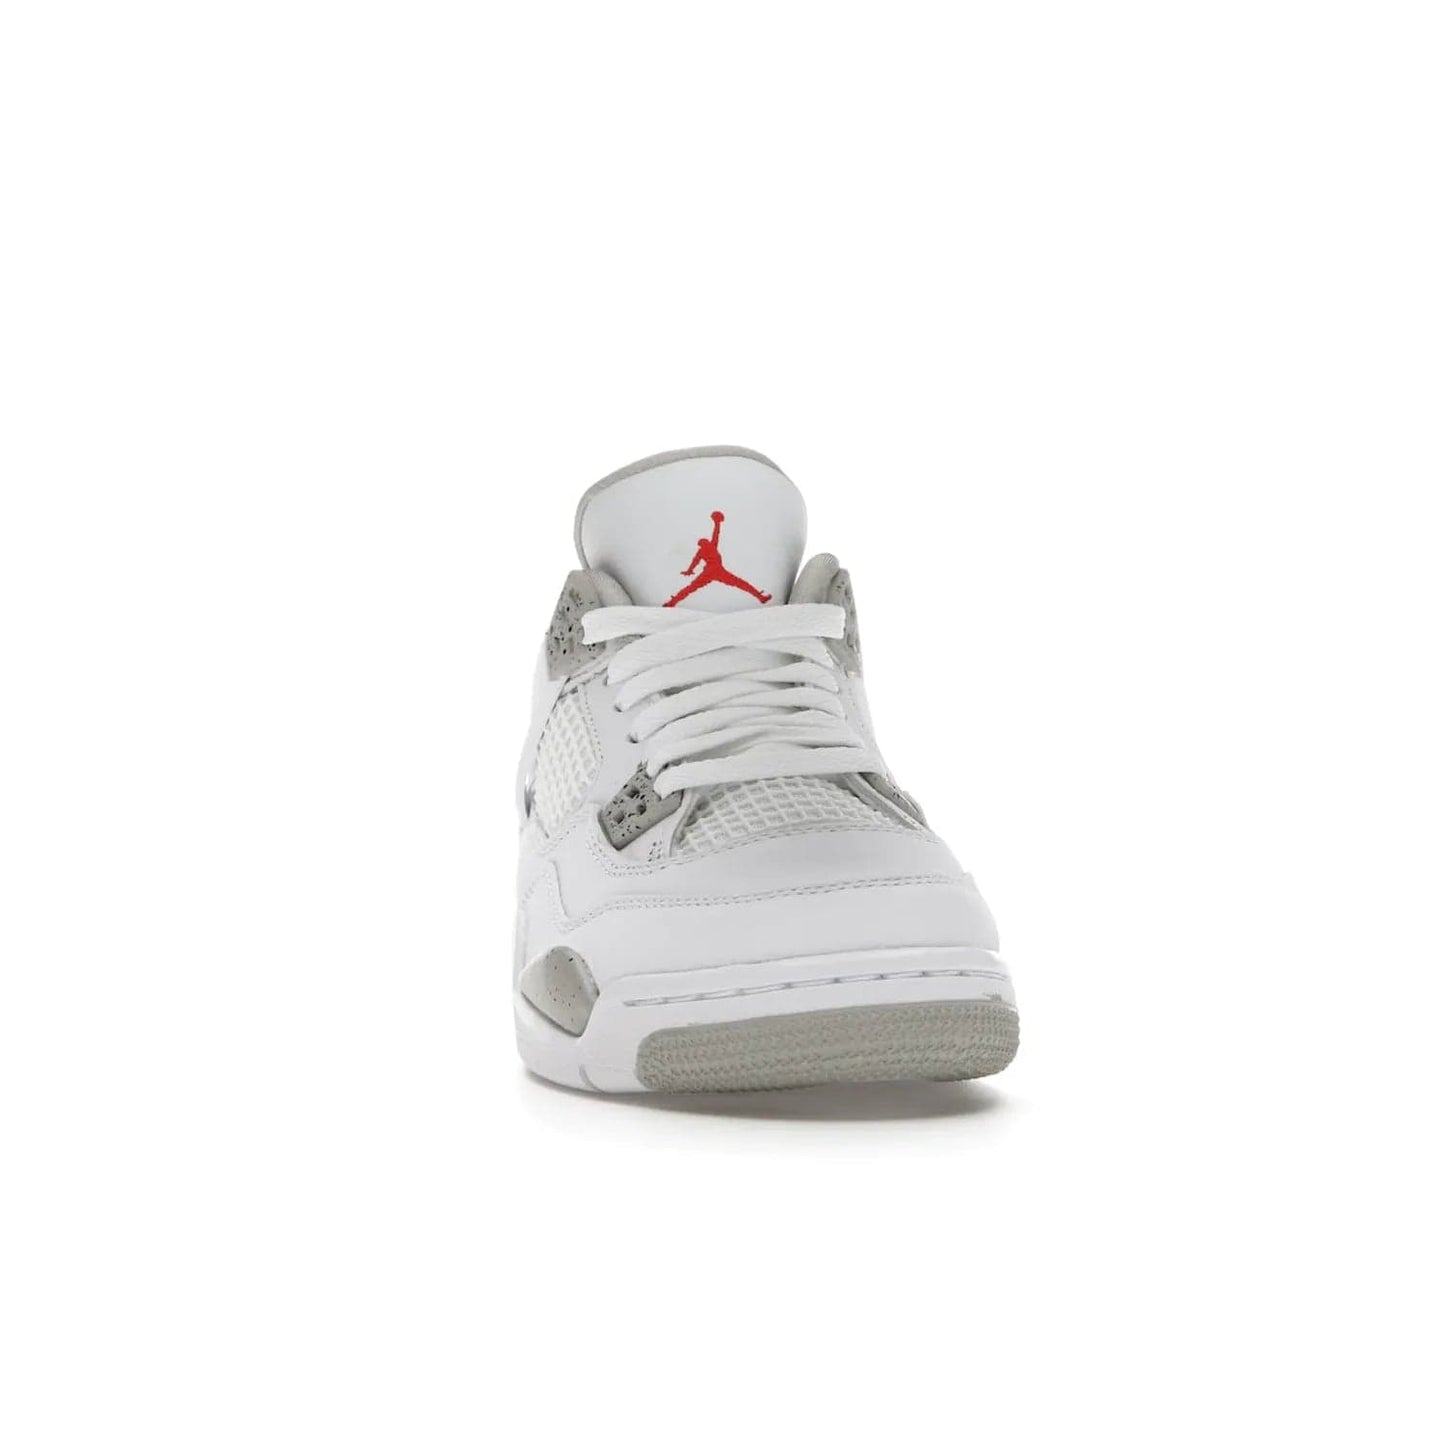 Jordan 4 Retro White Oreo (2021) (GS) - Image 9 - Only at www.BallersClubKickz.com - White Oreo Air Jordan 4 Retro 2021 GS - Iconic sneaker silhouette with white canvas upper, Tech Grey detailing, and Fire Red accents. Available July 2021.